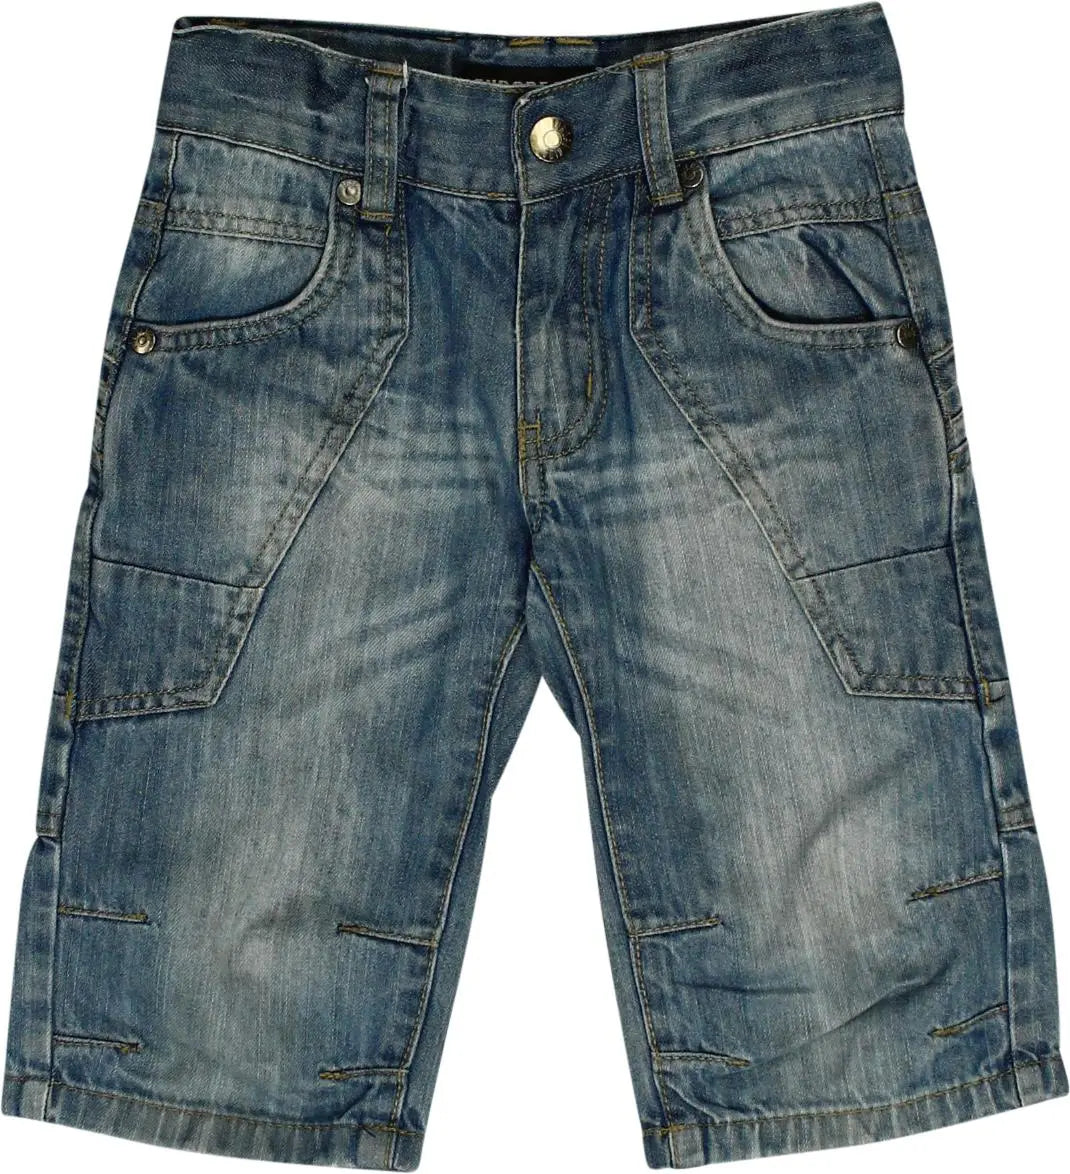 Europe Kids - Three-Quarter Jeans- ThriftTale.com - Vintage and second handclothing